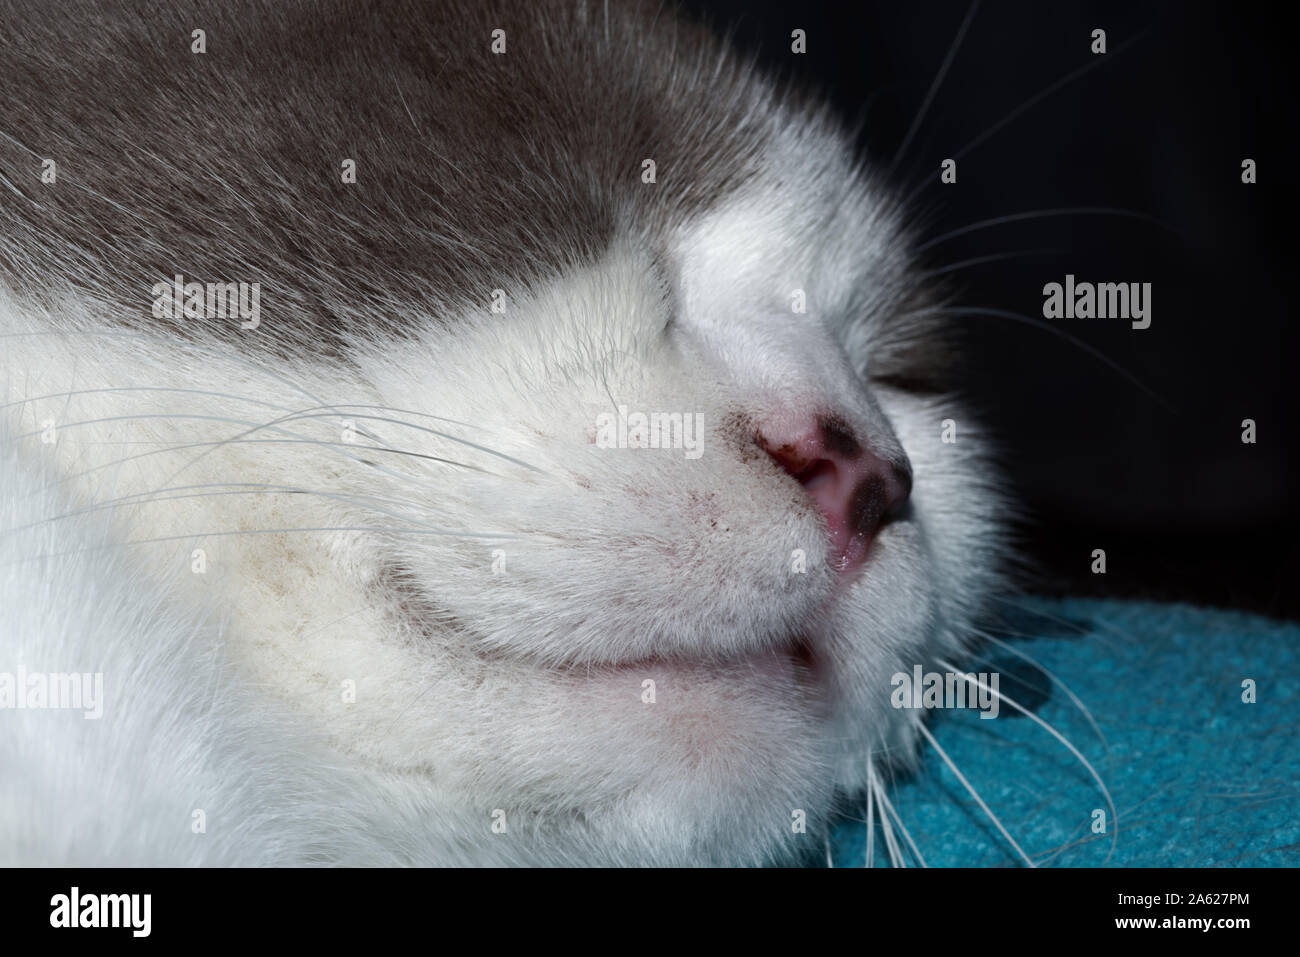 Close-up of a cat's head while sleeping Stock Photo